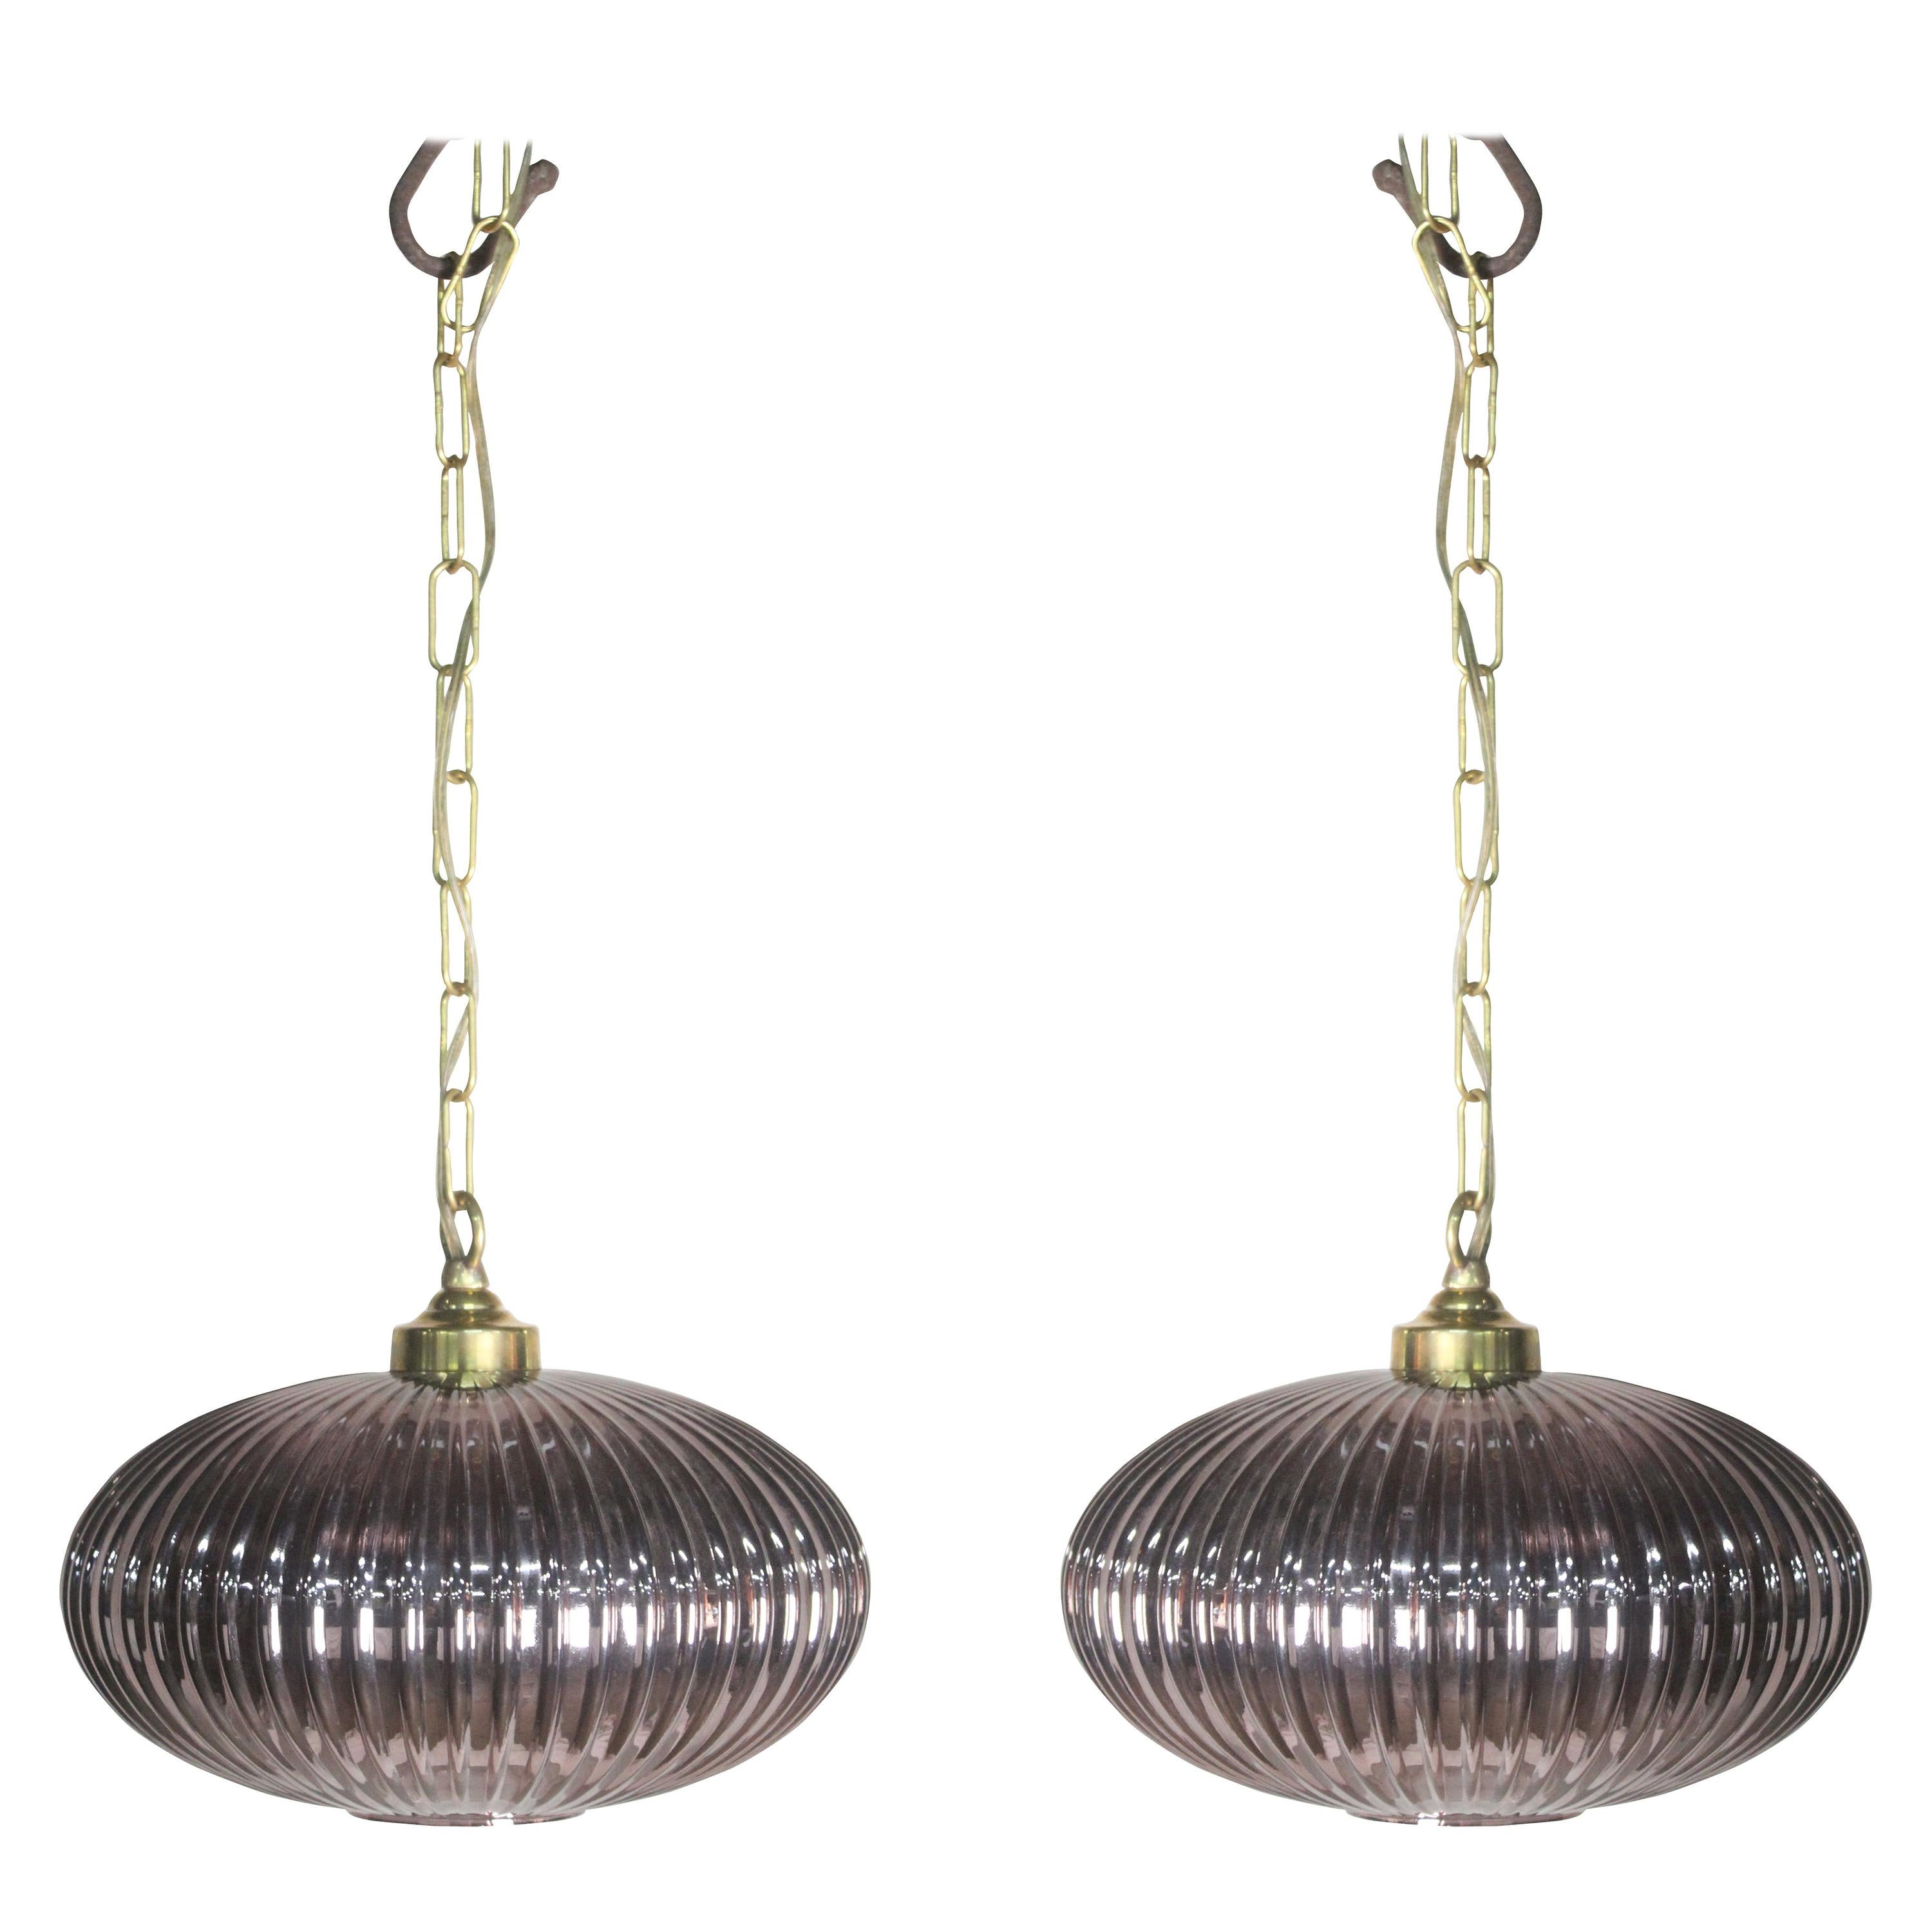 Pair of Mid-Century Modern Pale Amethyst Ribbed Glass Pendant Lights